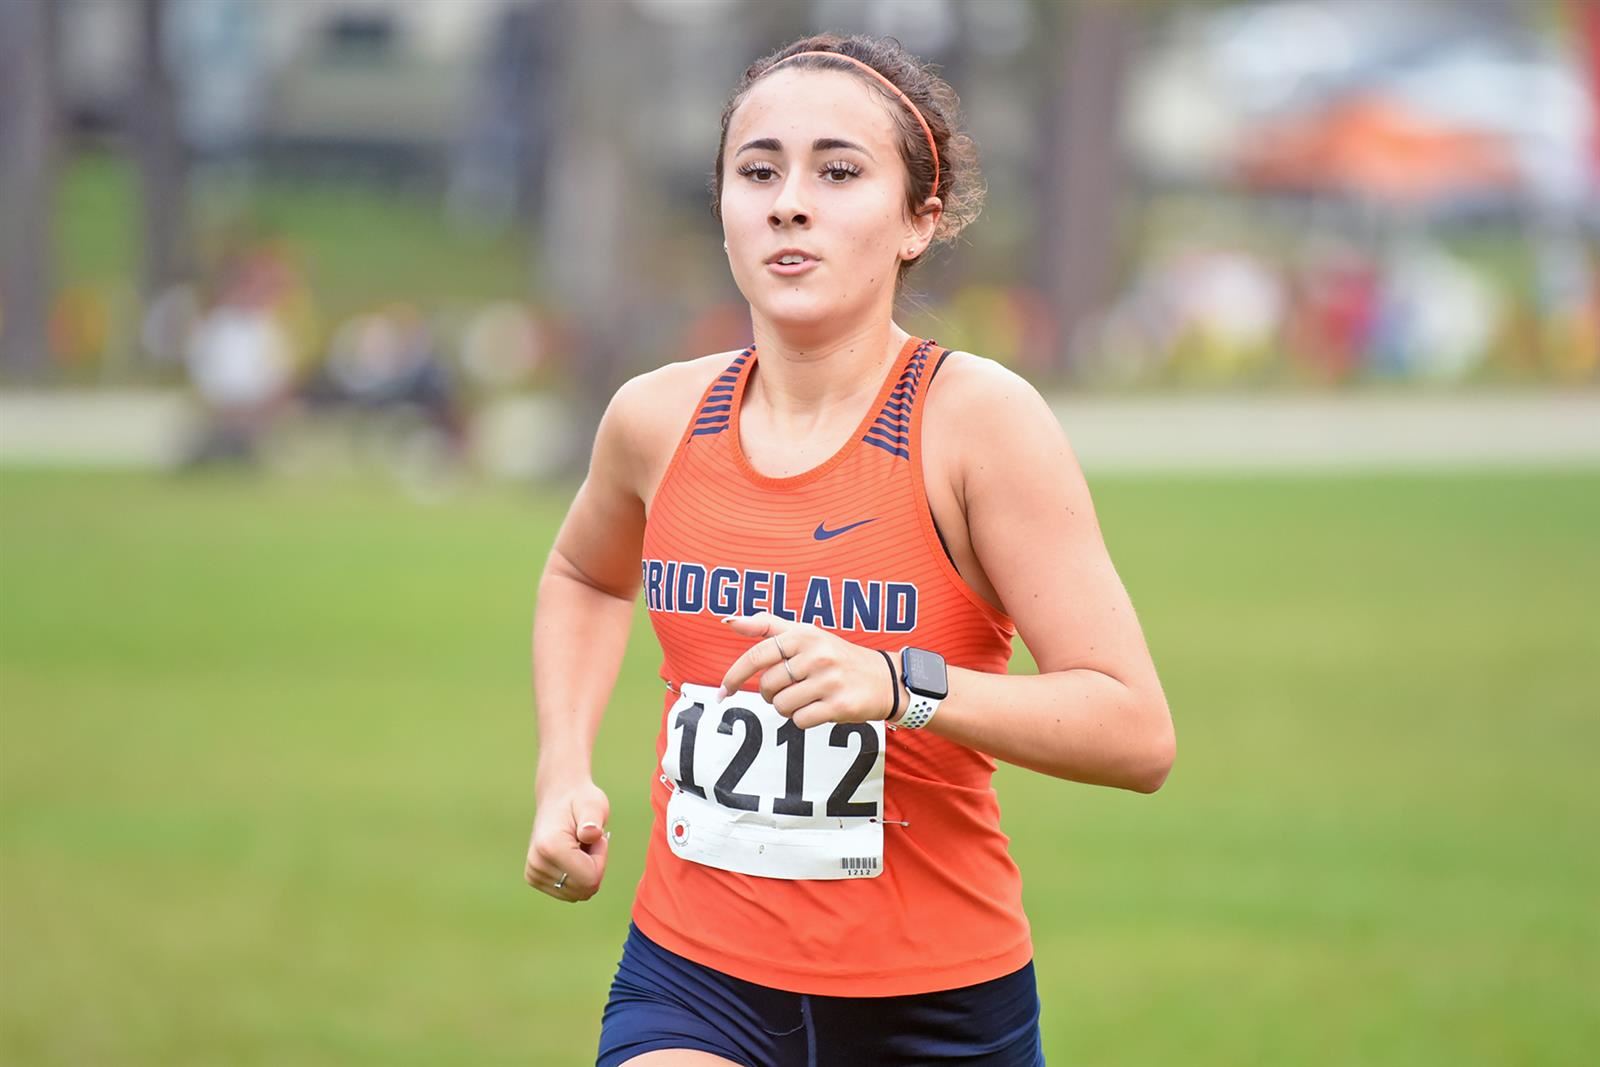 Cassidy Graham helped the Bridgeland girls’ cross country team finish 11th in Class 6A at the UIL Cross Country Championships